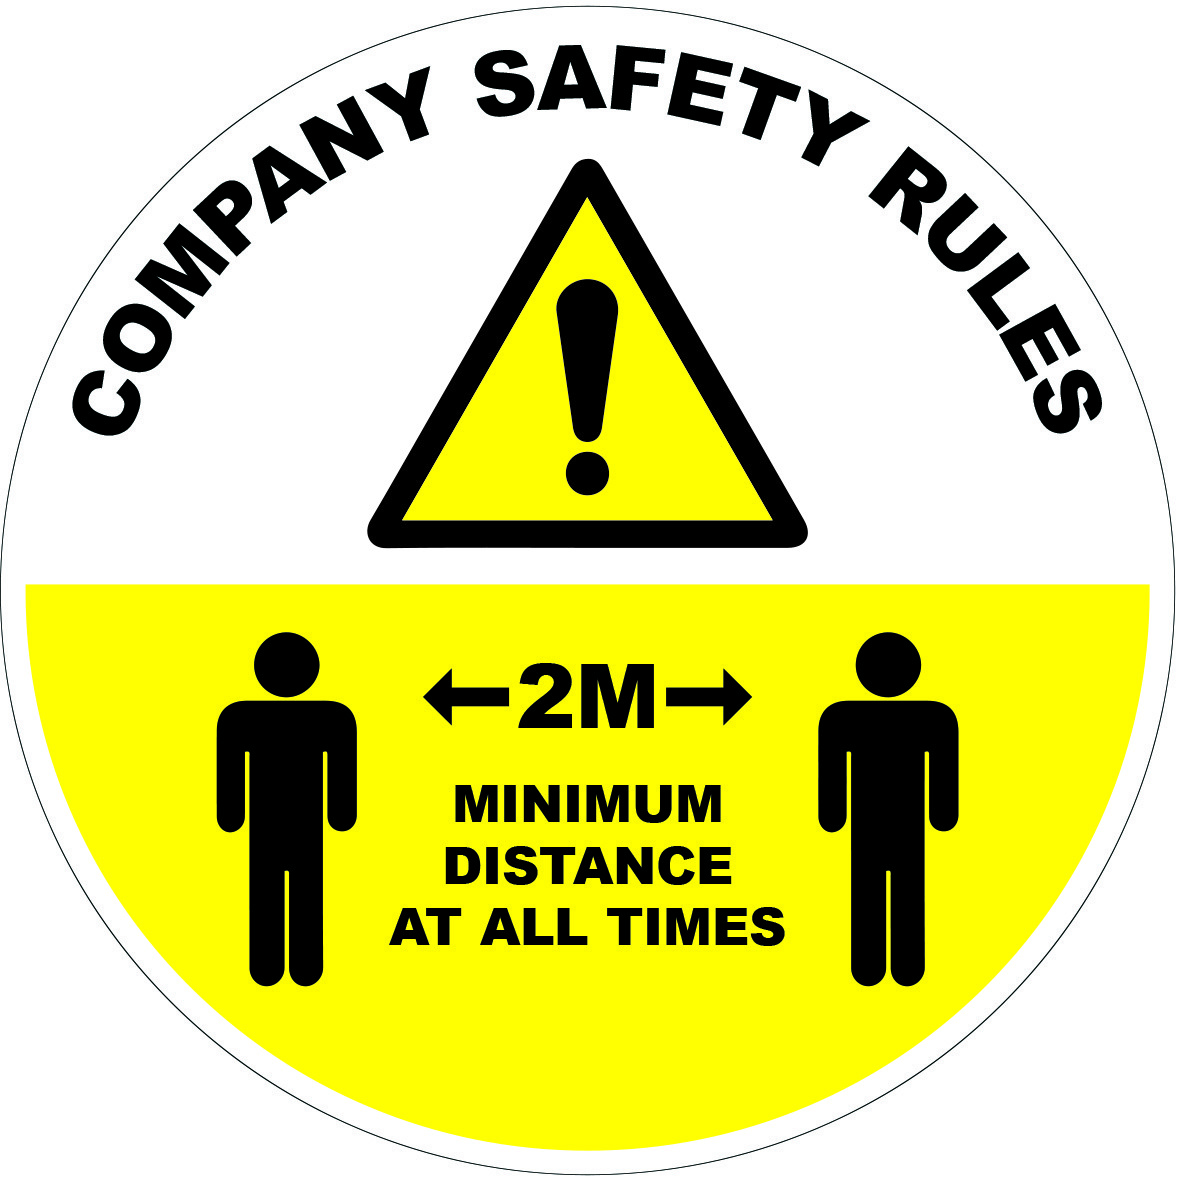 Adhesive Waterproof Vinyl Sticker SAFETY SIGN Food Processing and Hygiene